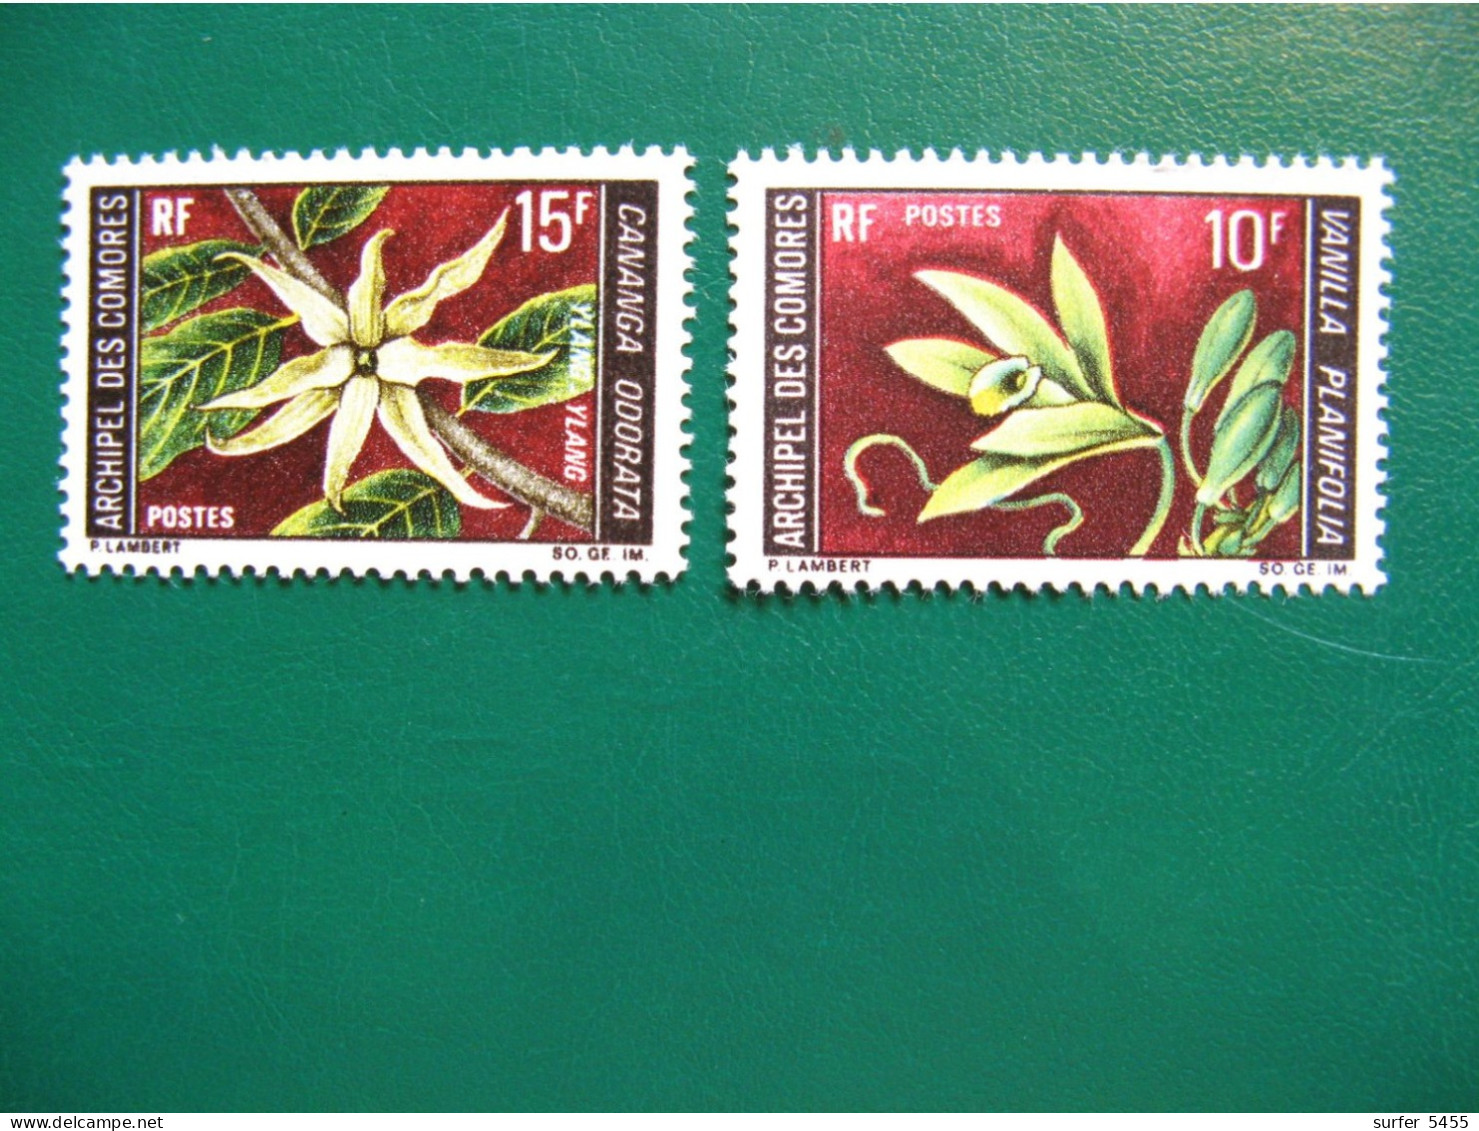 COMORES YVERT POSTE ORDINAIRE N° 53/54 TIMBRES NEUFS** LUXE COTE 5,50 EUROS - Unused Stamps